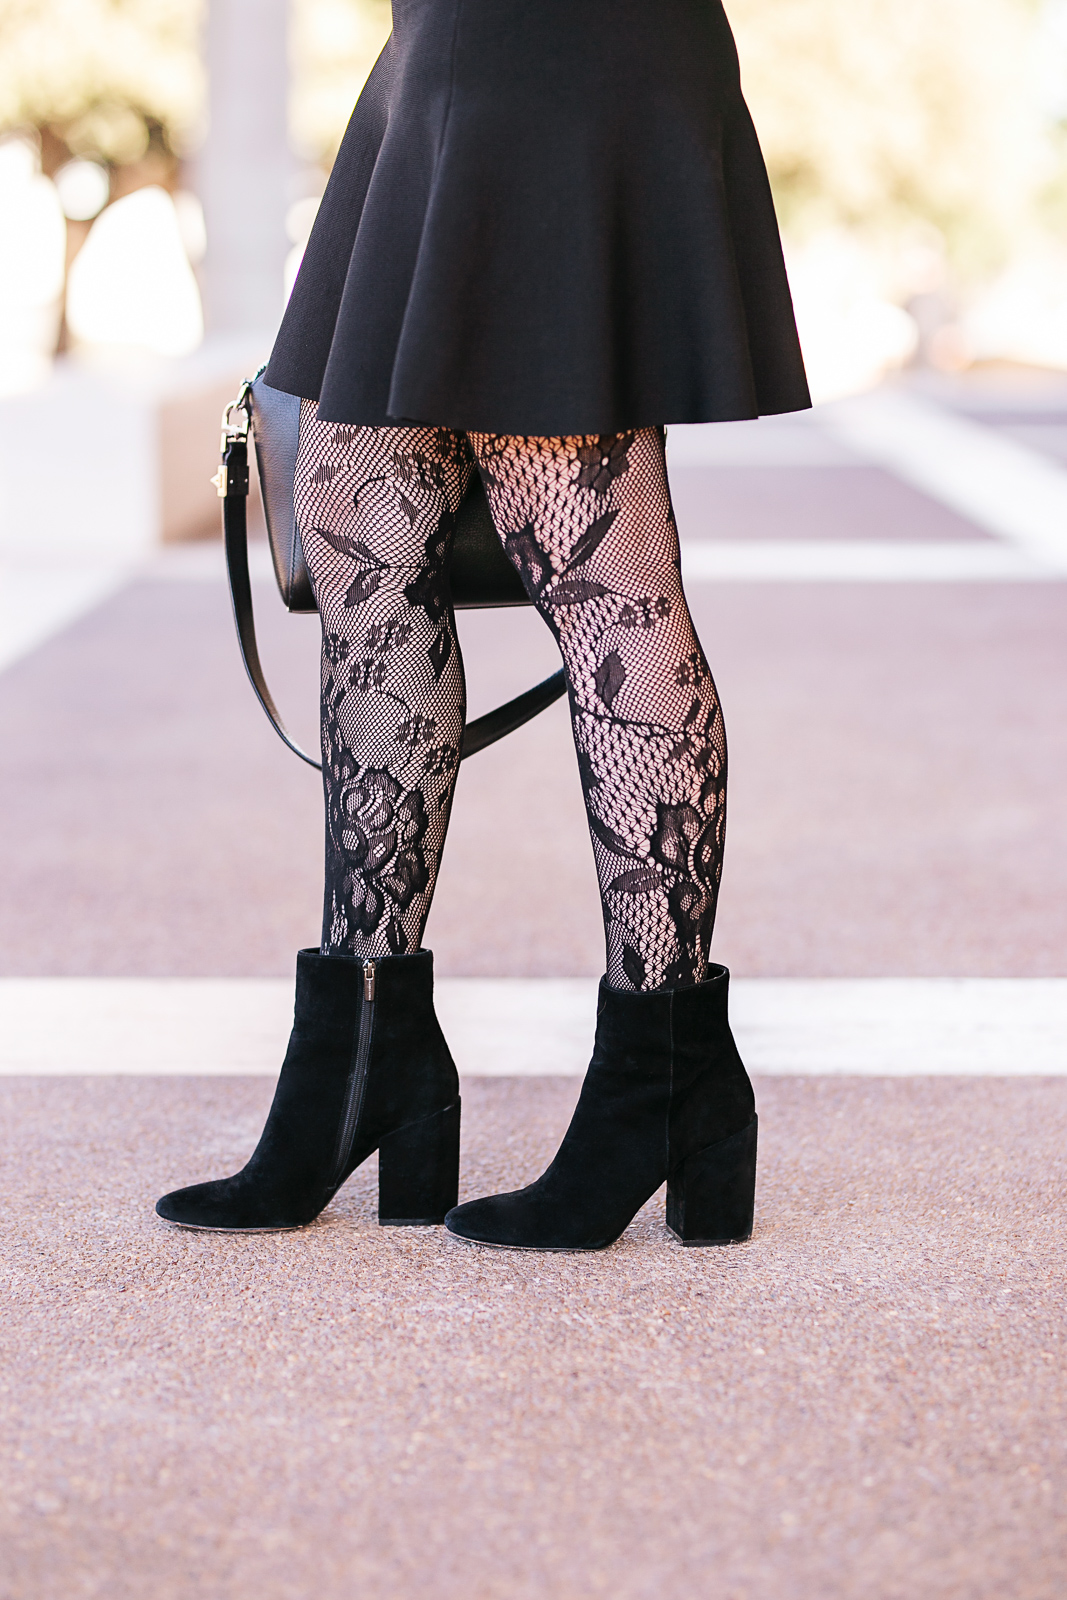 The 25 Best Patterned Tights and How to Wear Them